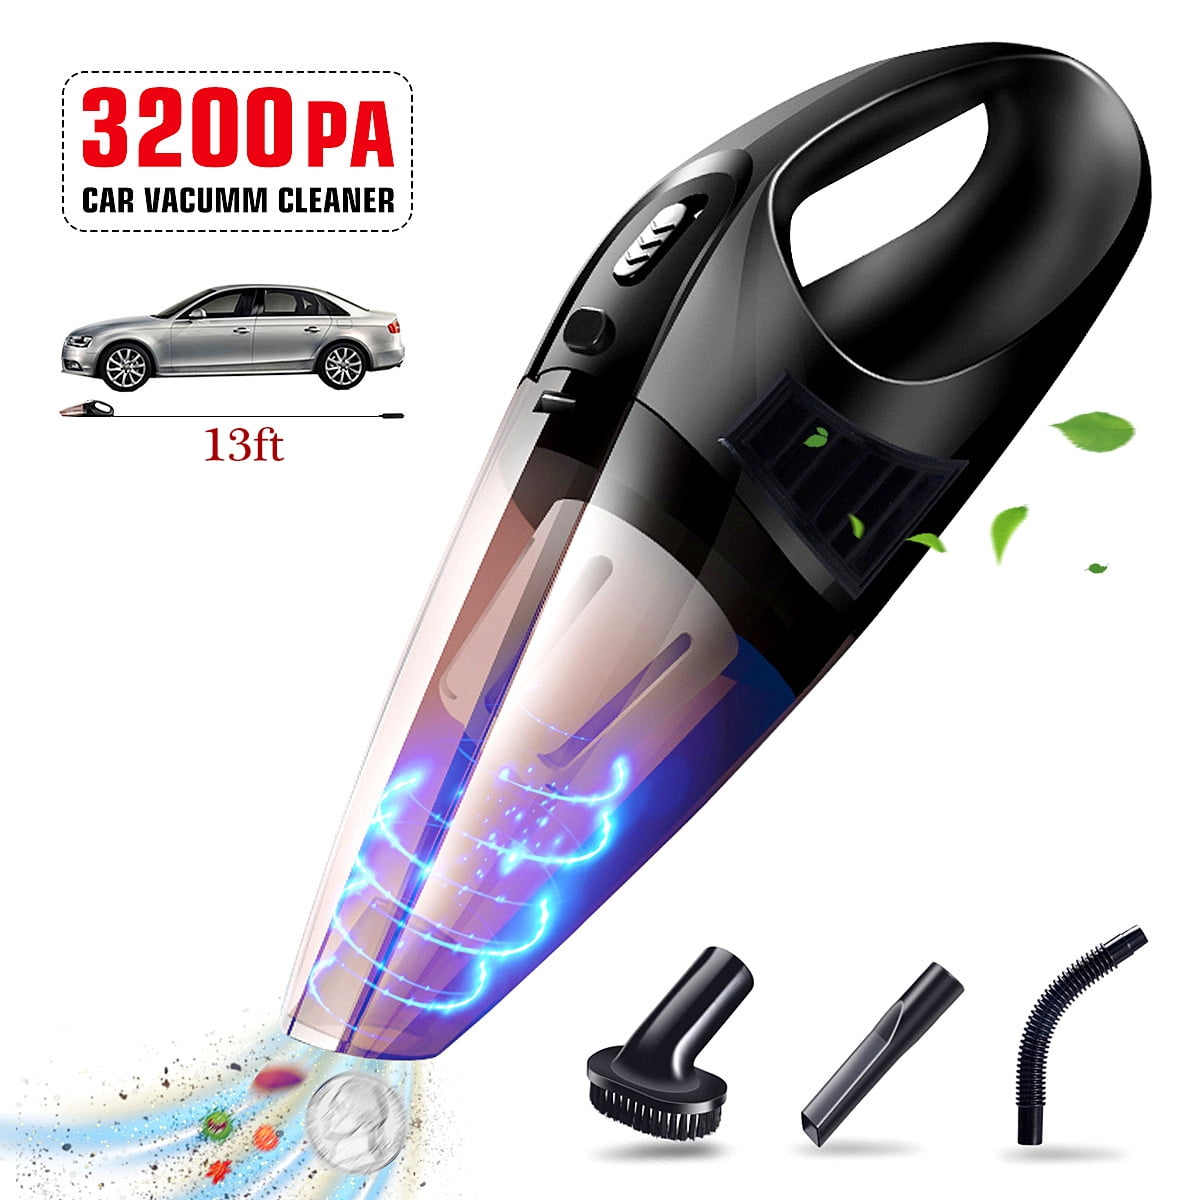 Vacuum Car Cleaner Wet Dry Portable Handheld Home Duster Cordless Rechargeable 